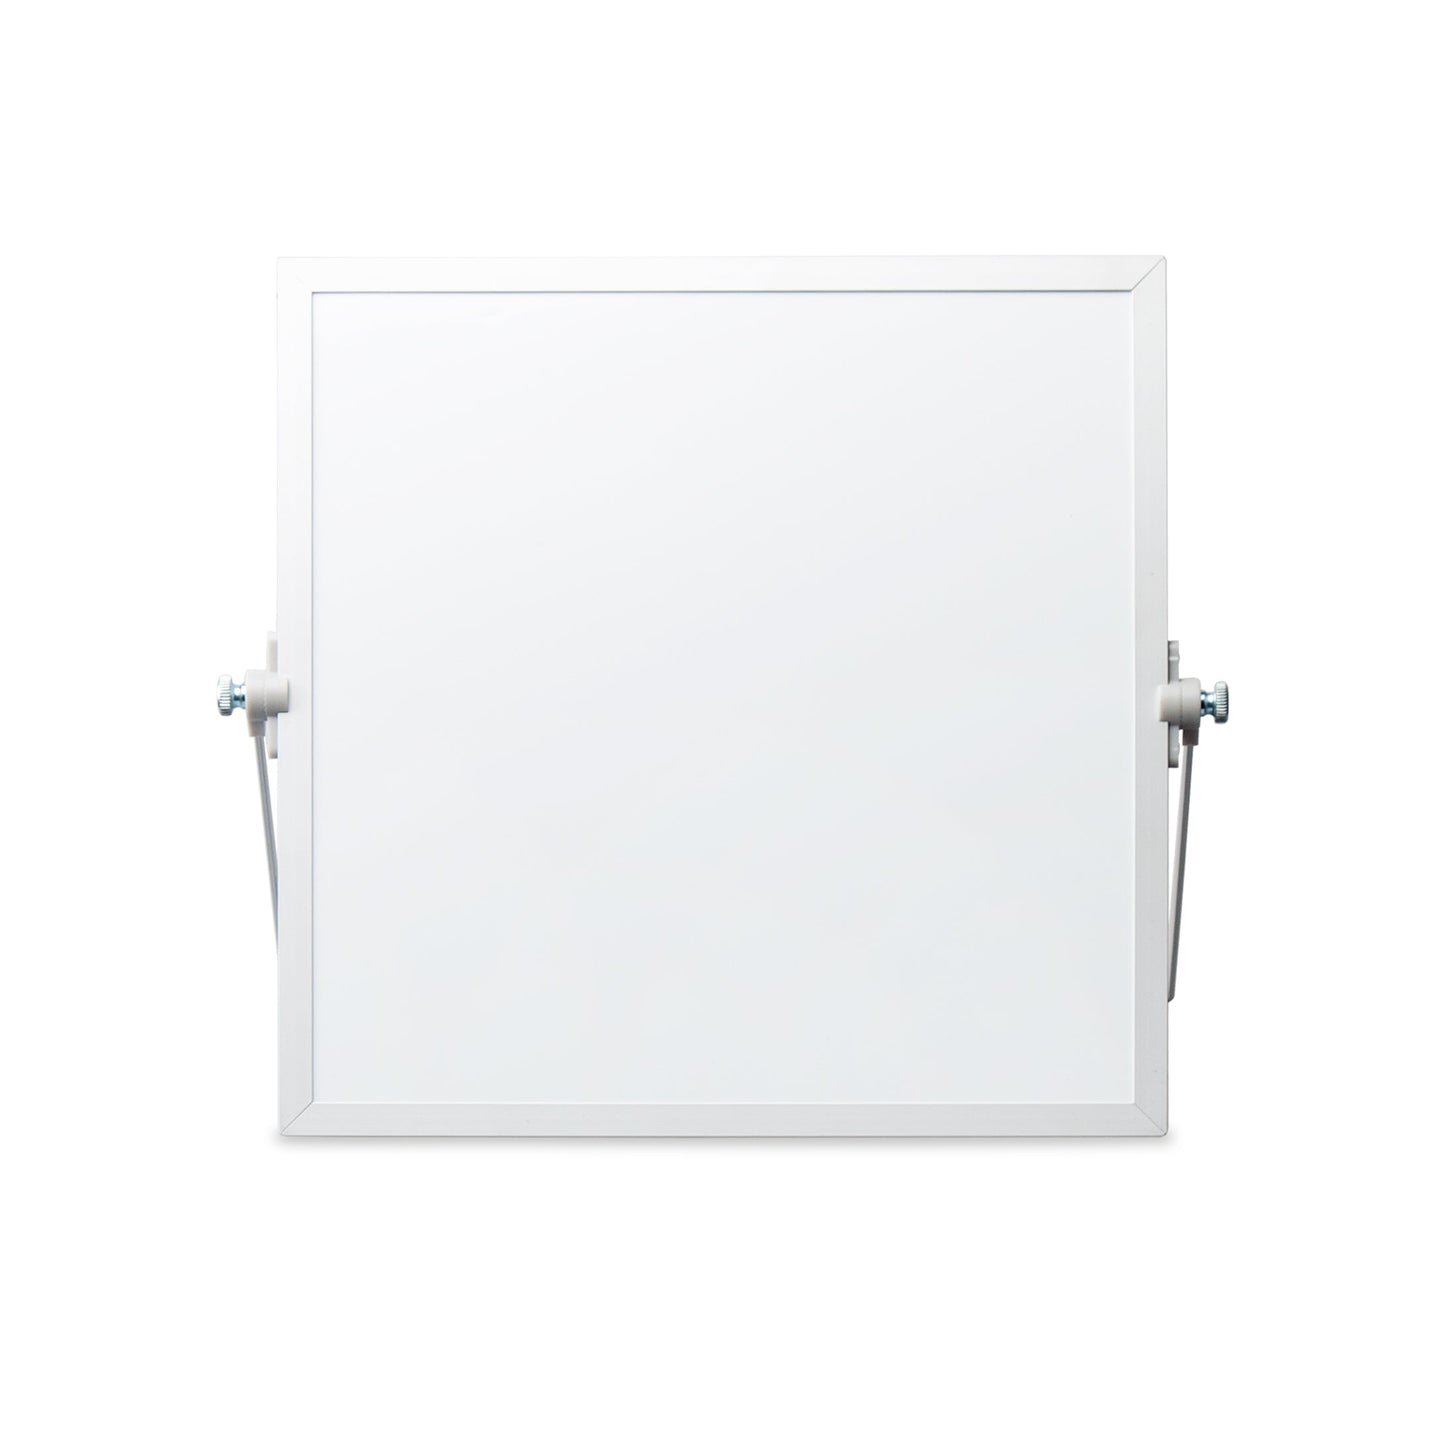 M24 10X10 Inch Aluminum Frame Small Magnetic Desktop Board, Mini Portable Dry Erase White Board For Students Office - Premium magnetic whiteboard from Madic Whiteboard - Madic Whiteboard